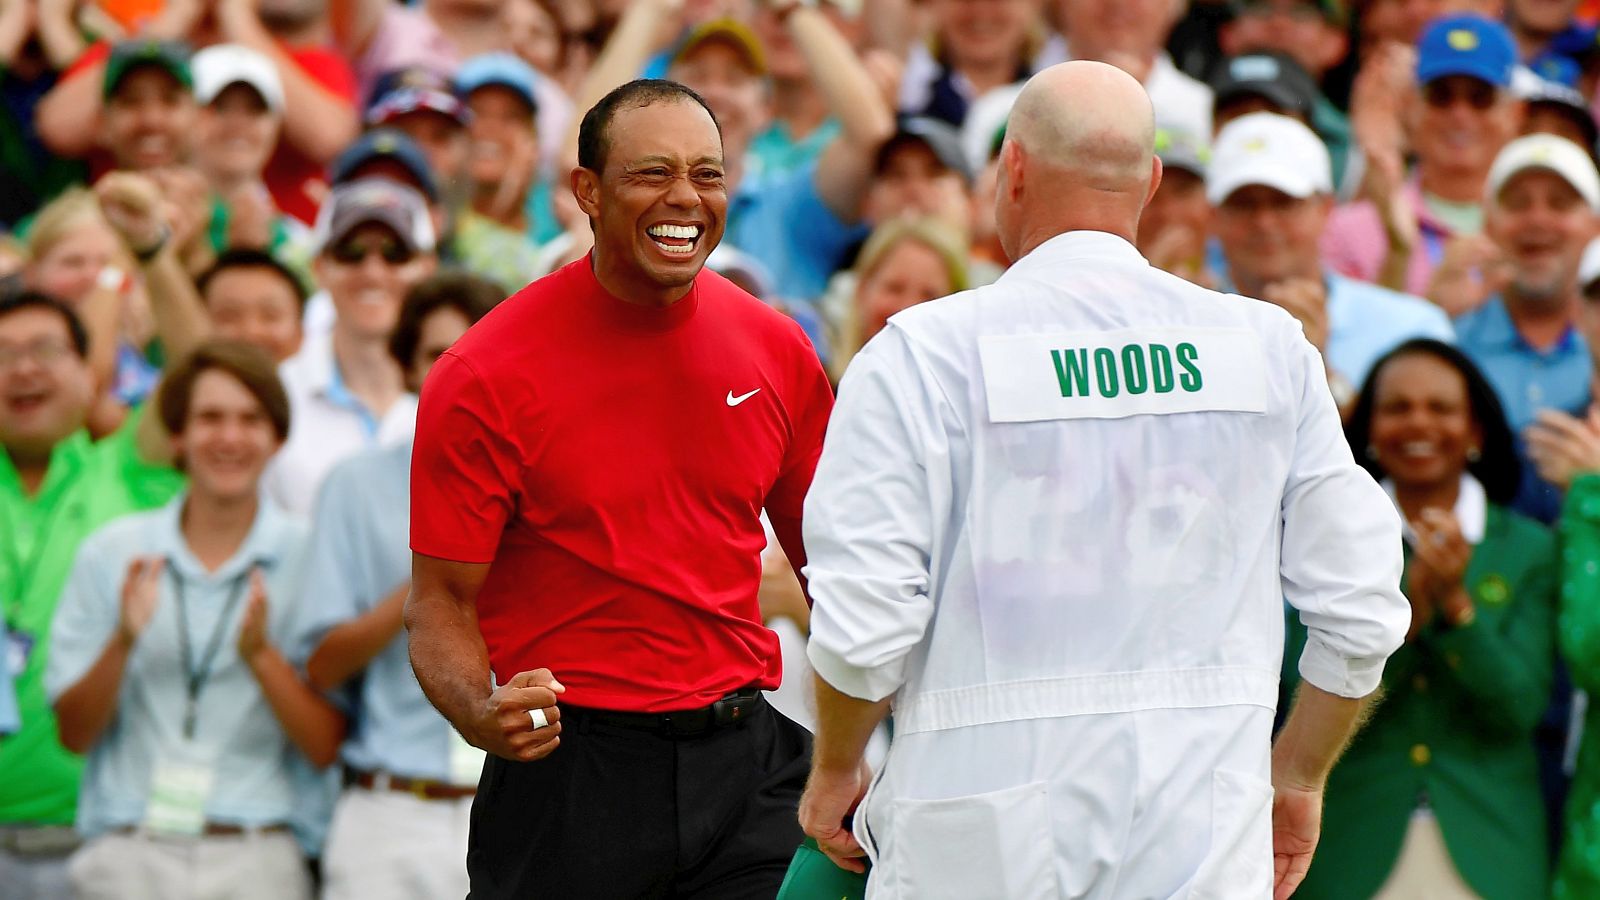 The Masters 2019: Tiger Woods / USA © Augusta National / Getty Images